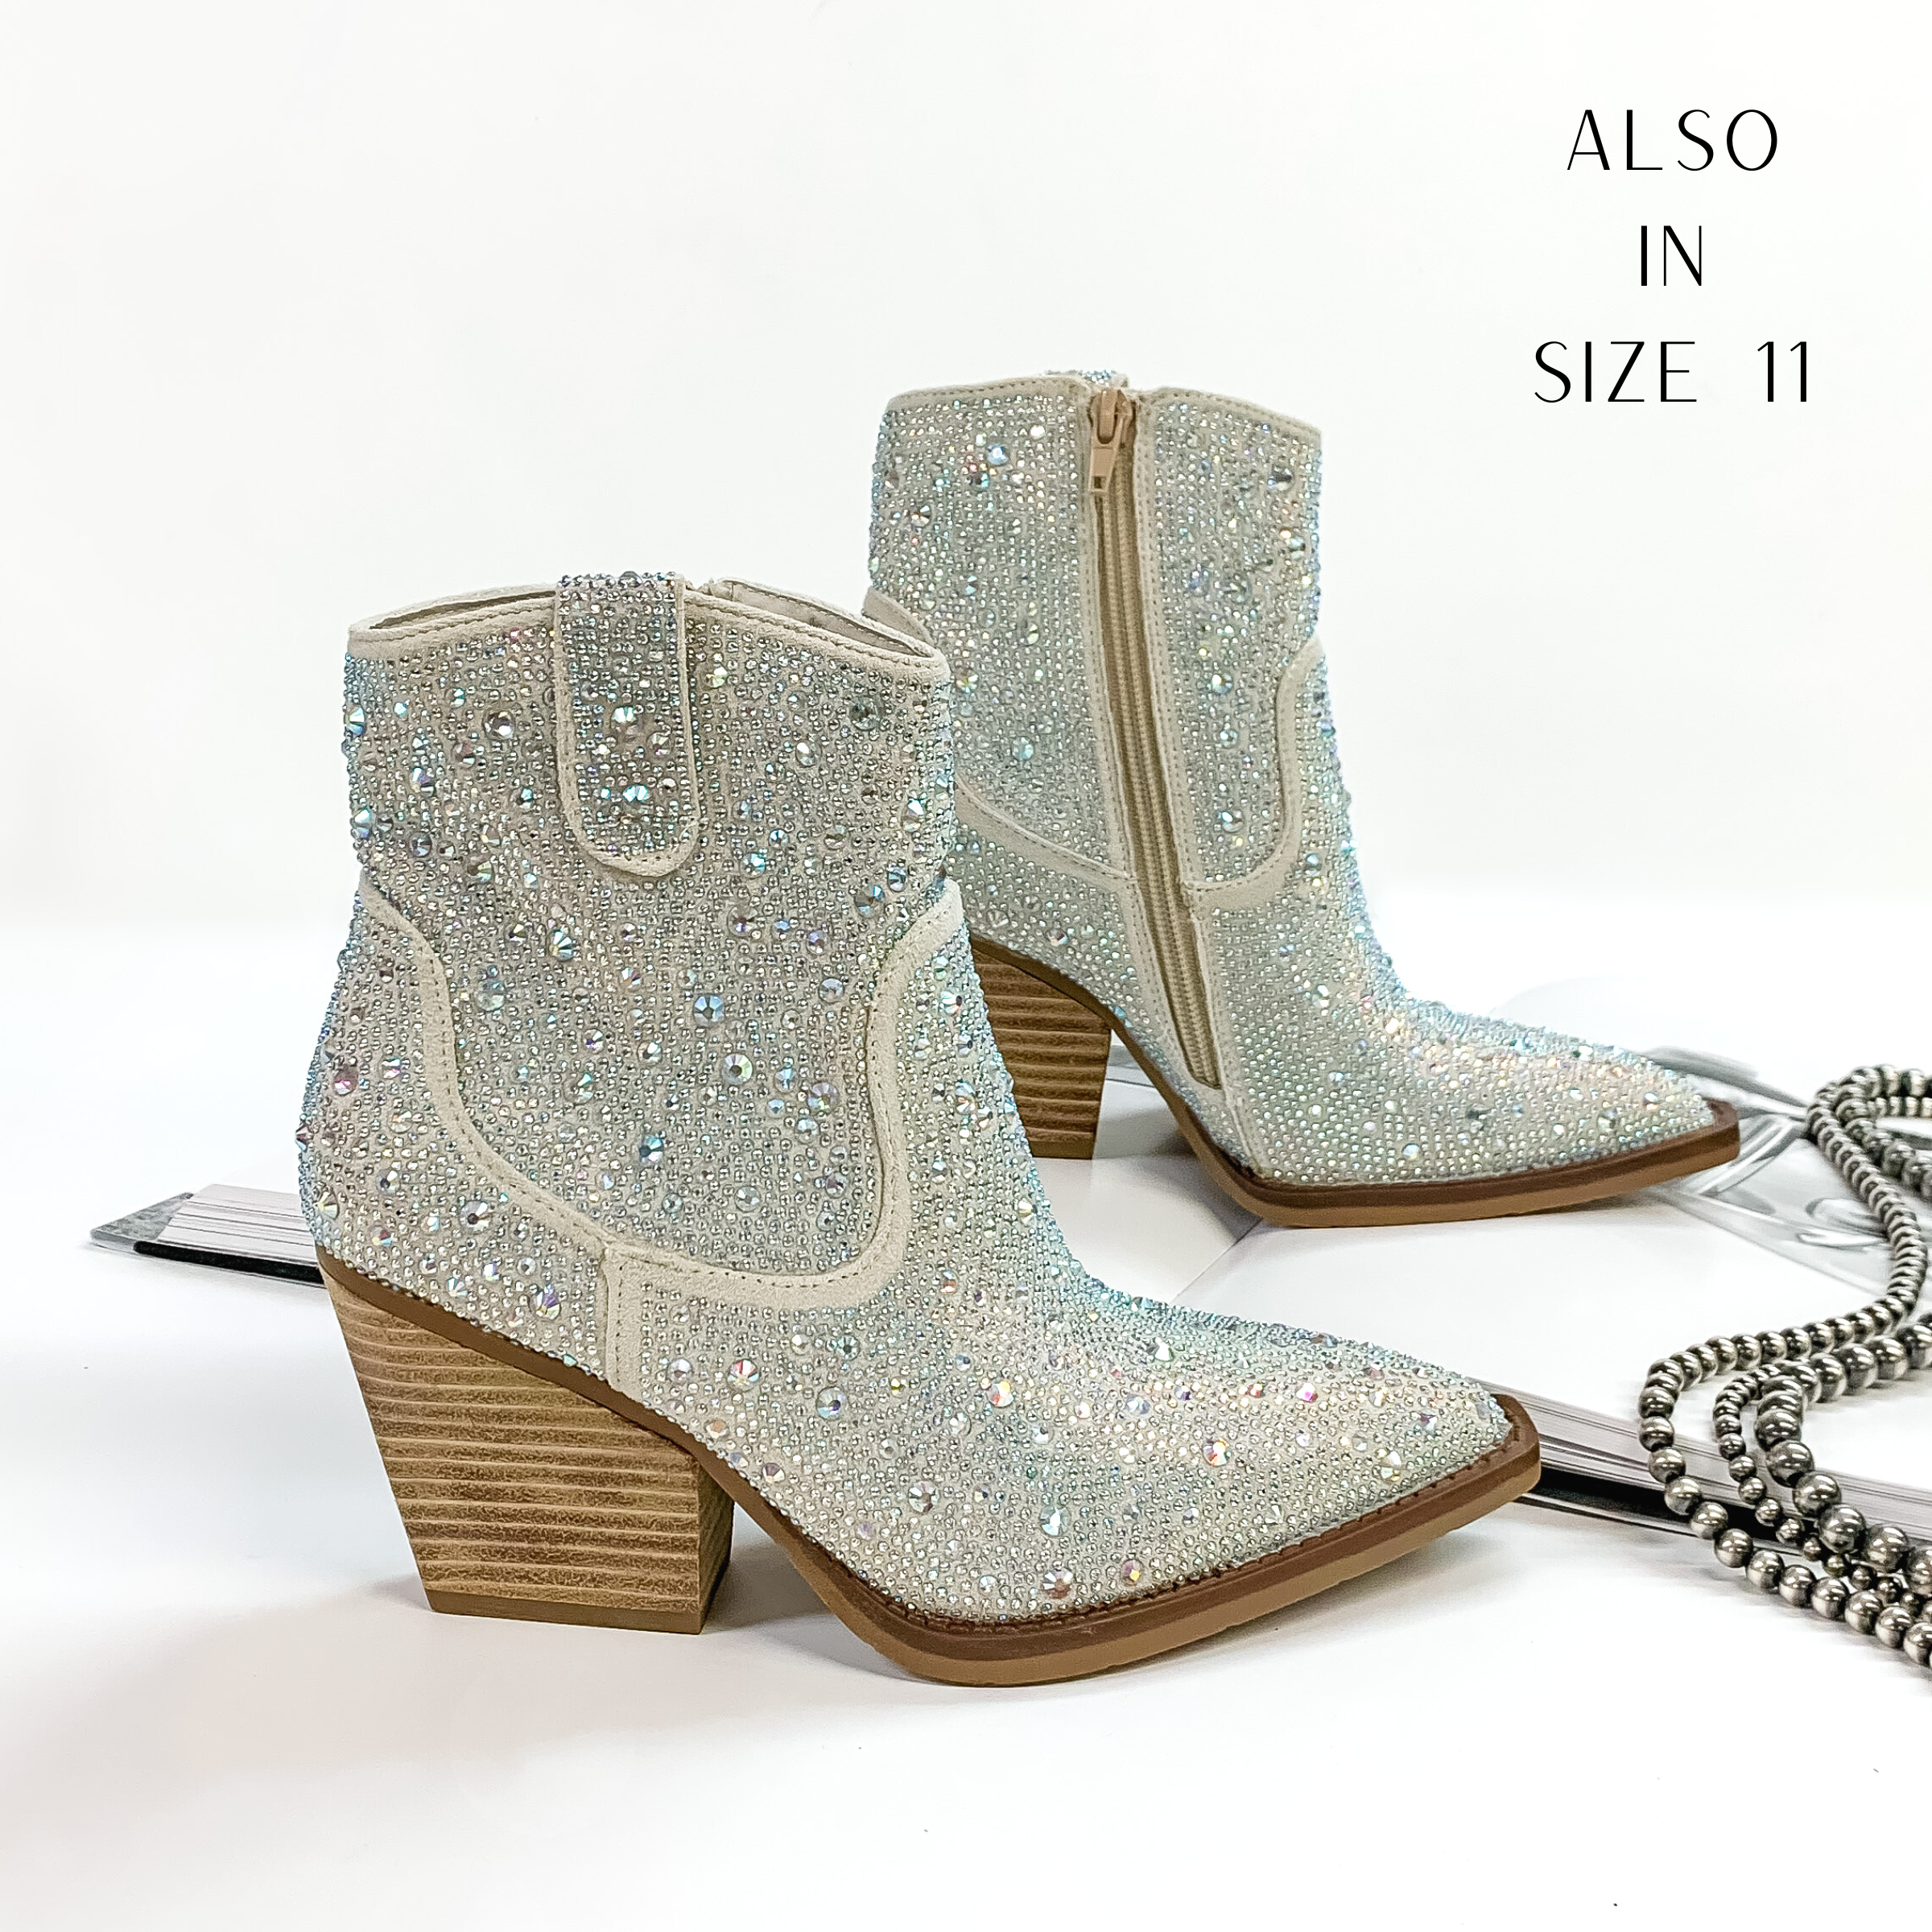 Pictured are silver cowboy booties with ab crystals covering the entire boot. These boots also include a tan heel and sole. These boots are pictured on front on a white background with one boot resting on an open book.